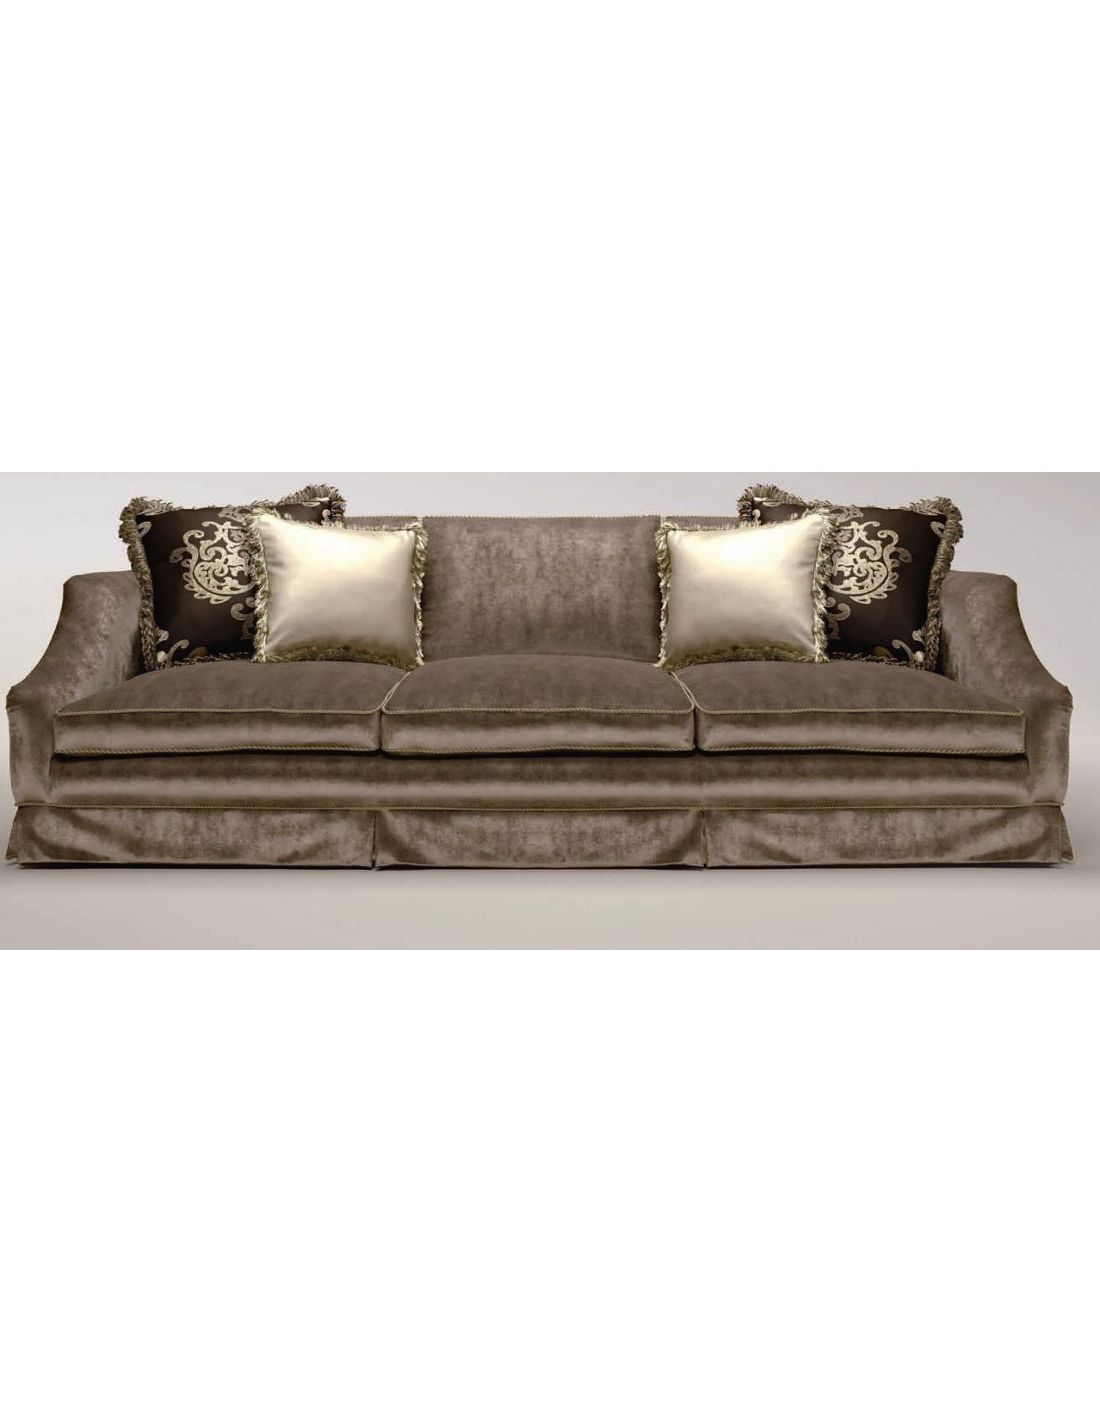 Upholstered Sofa With Curved Arms In Sofas With Curved Arms (View 15 of 20)